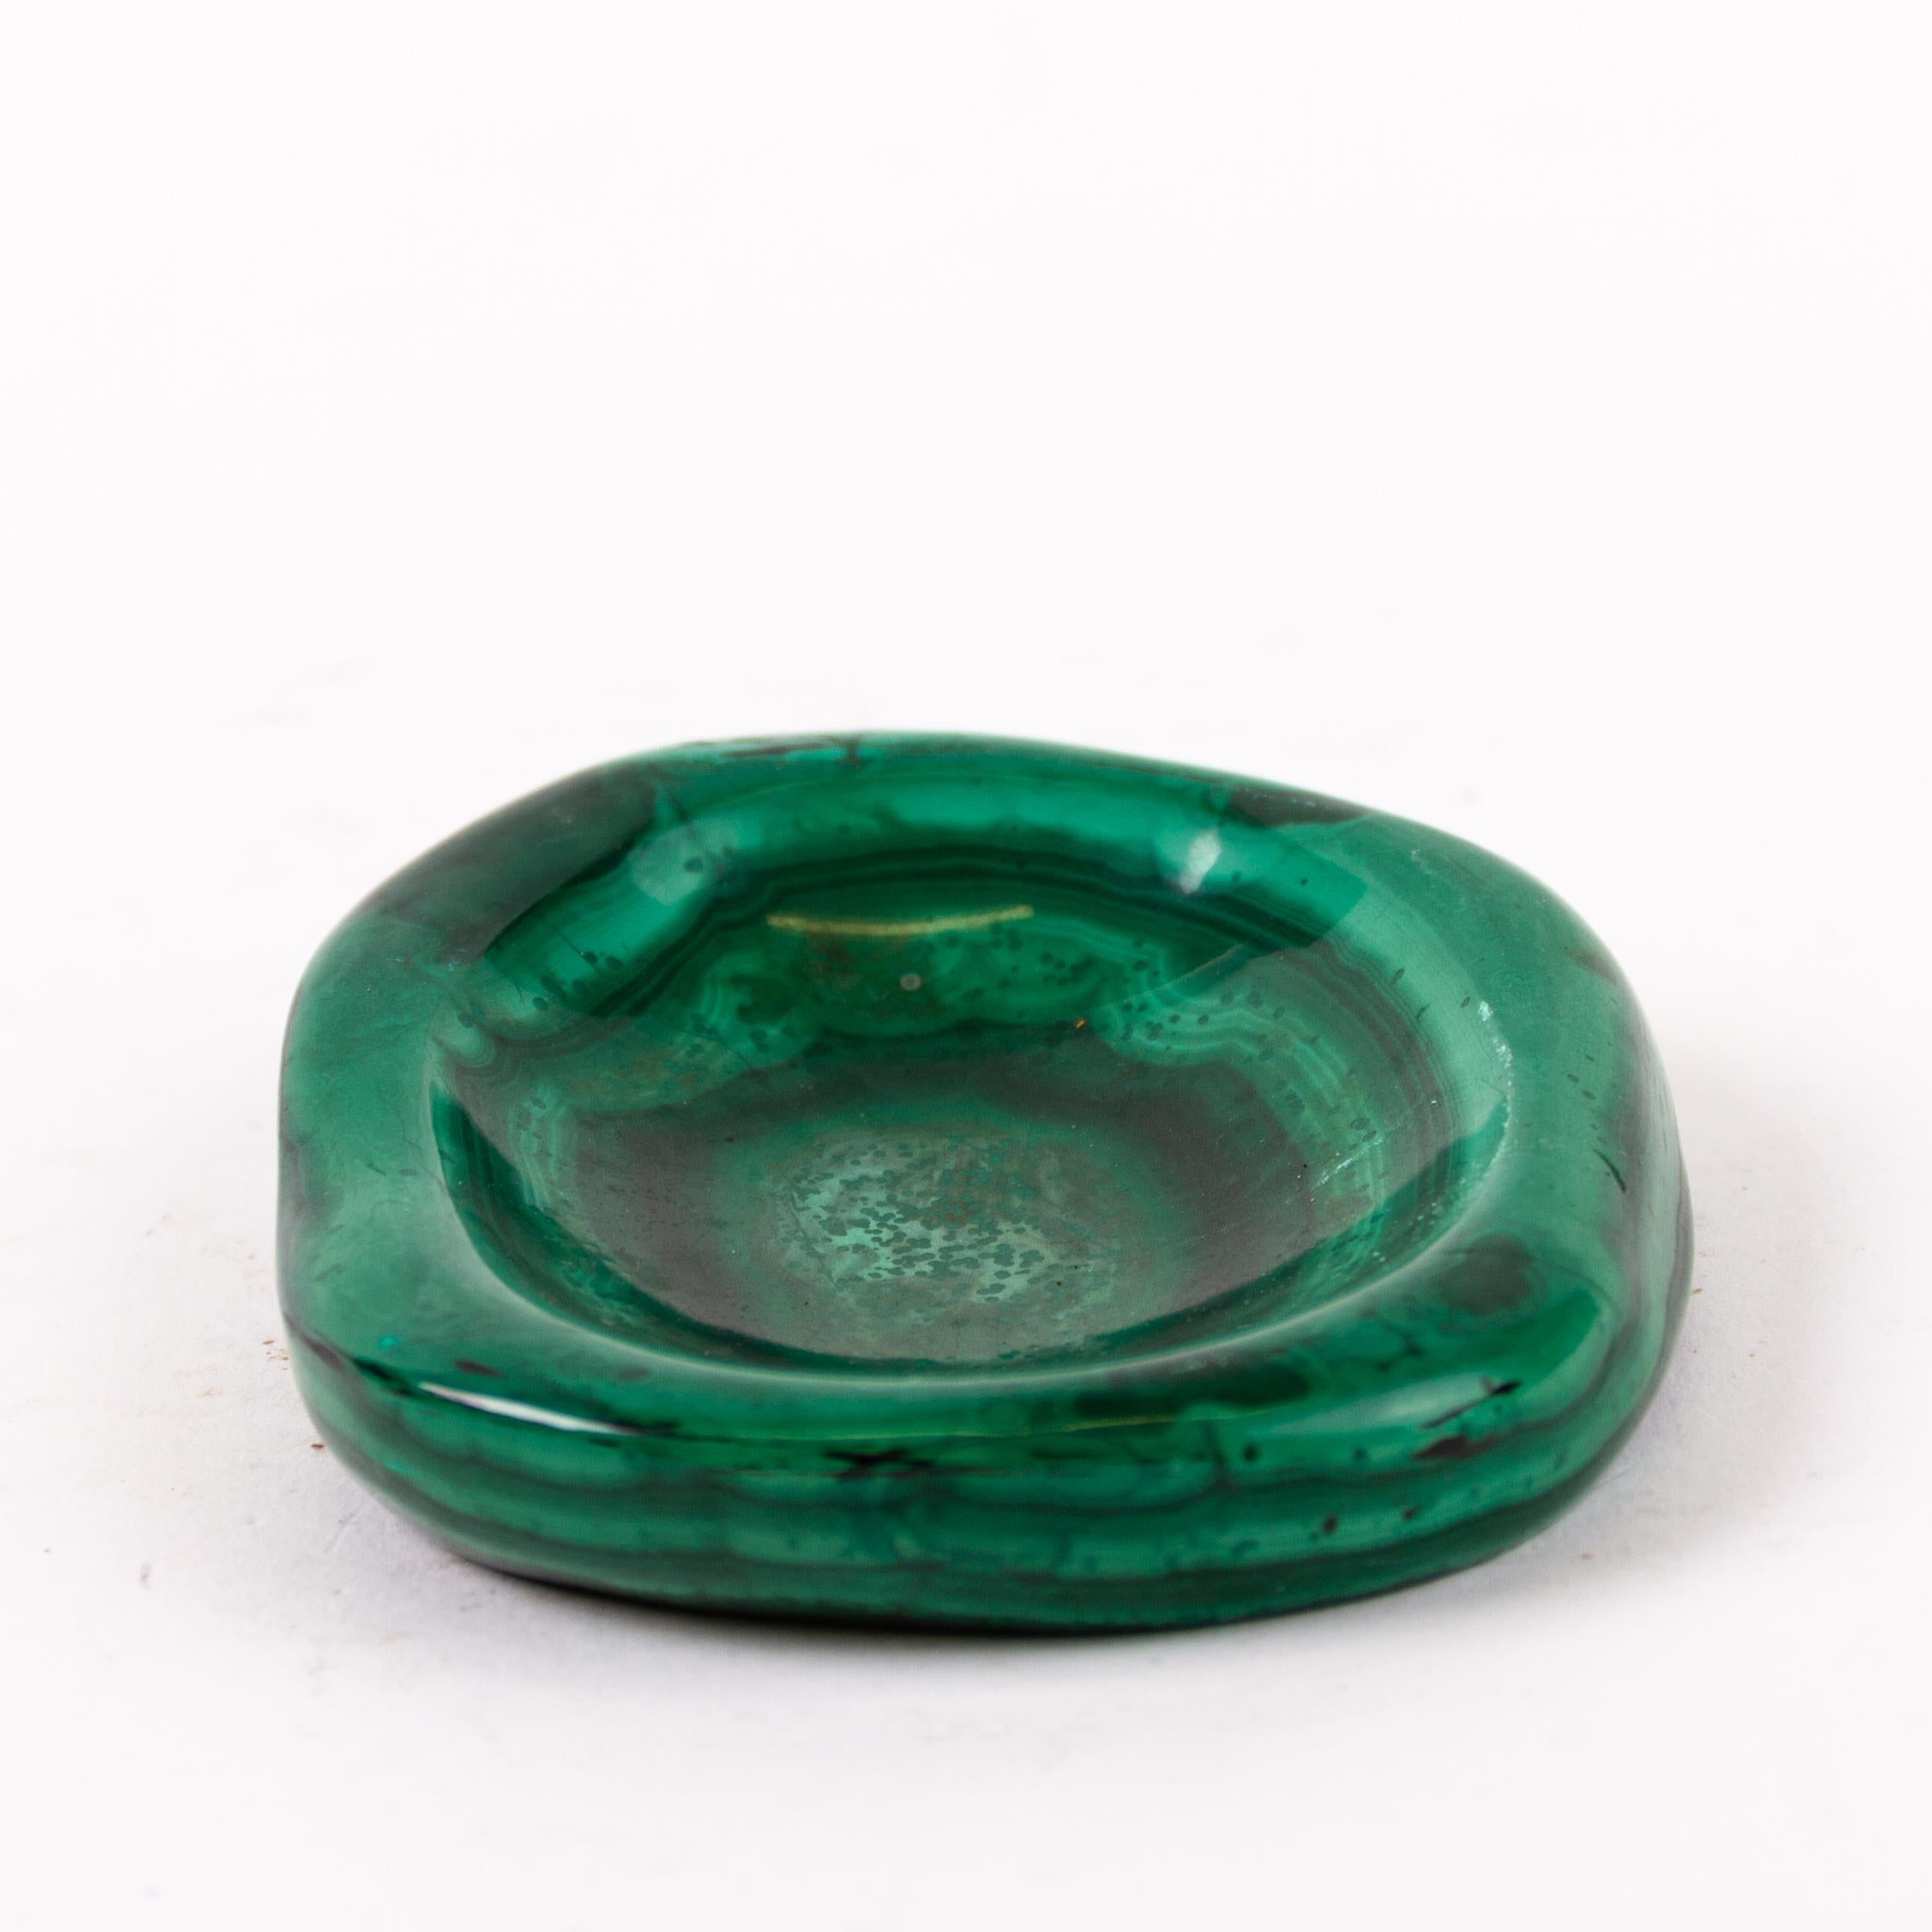 Malachite Geode Specimen Carved Ashtray or Vide Poche 
Good overall condition
Free international shipping.